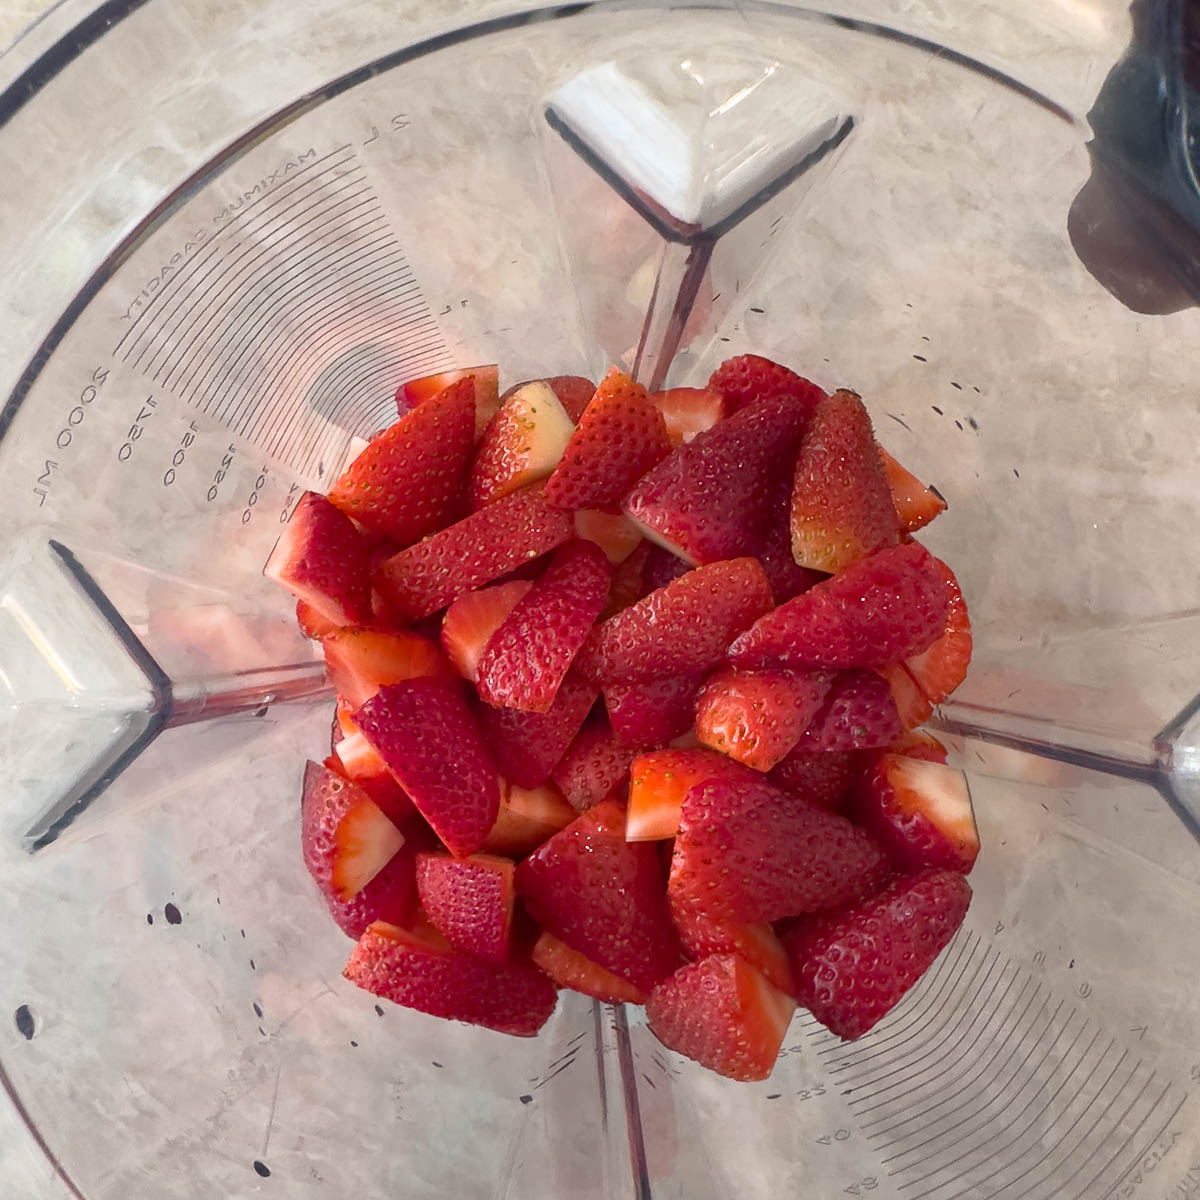 Chopped strawberries in a blend for pureeing into sauce.